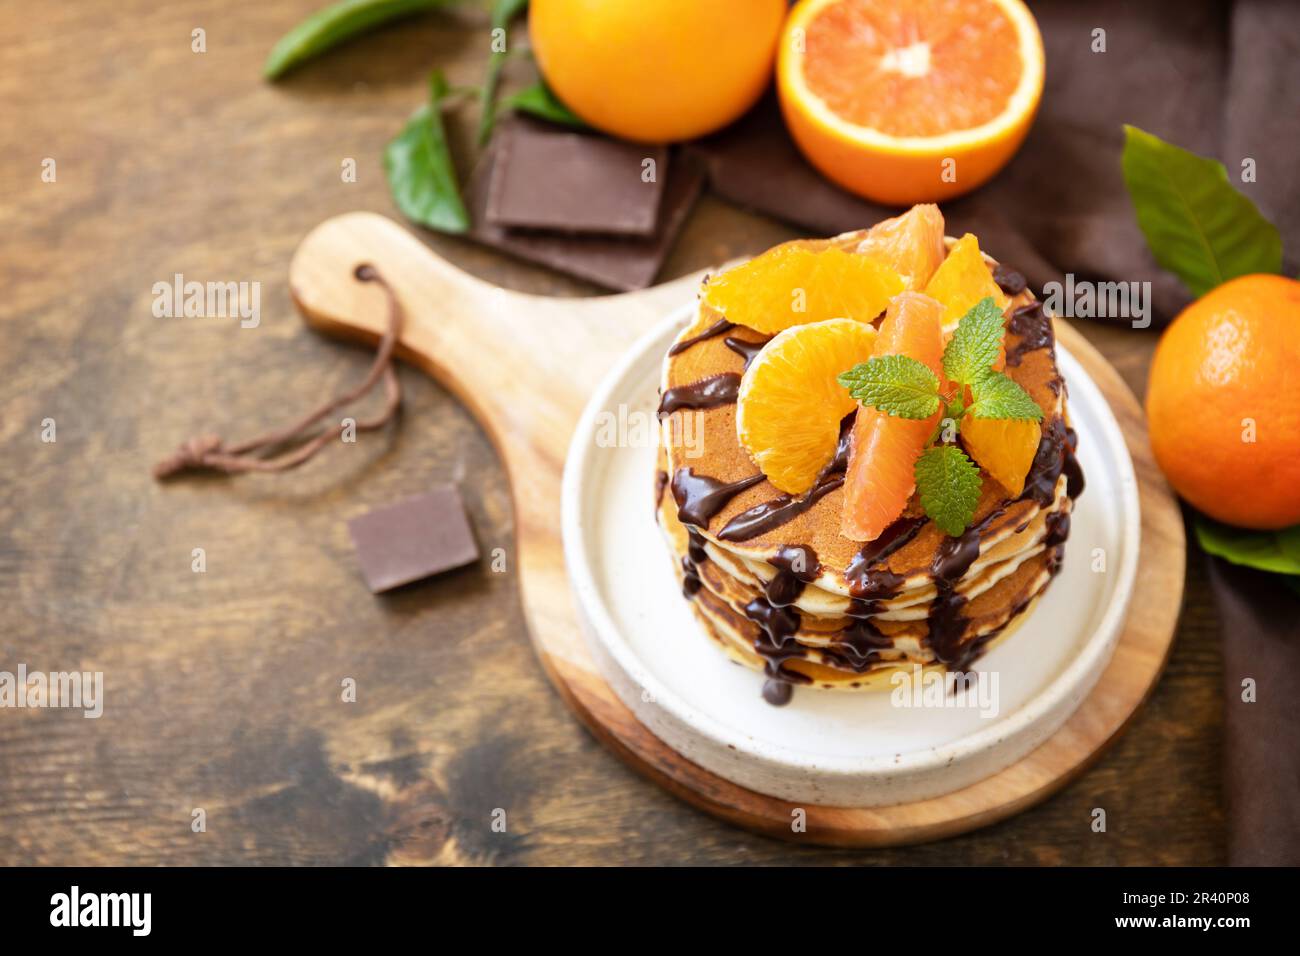 Celebrating Pancake day, healthy american breakfast. Delicious bananas pancakes with chocolate and red oranges on rustic table. Stock Photo